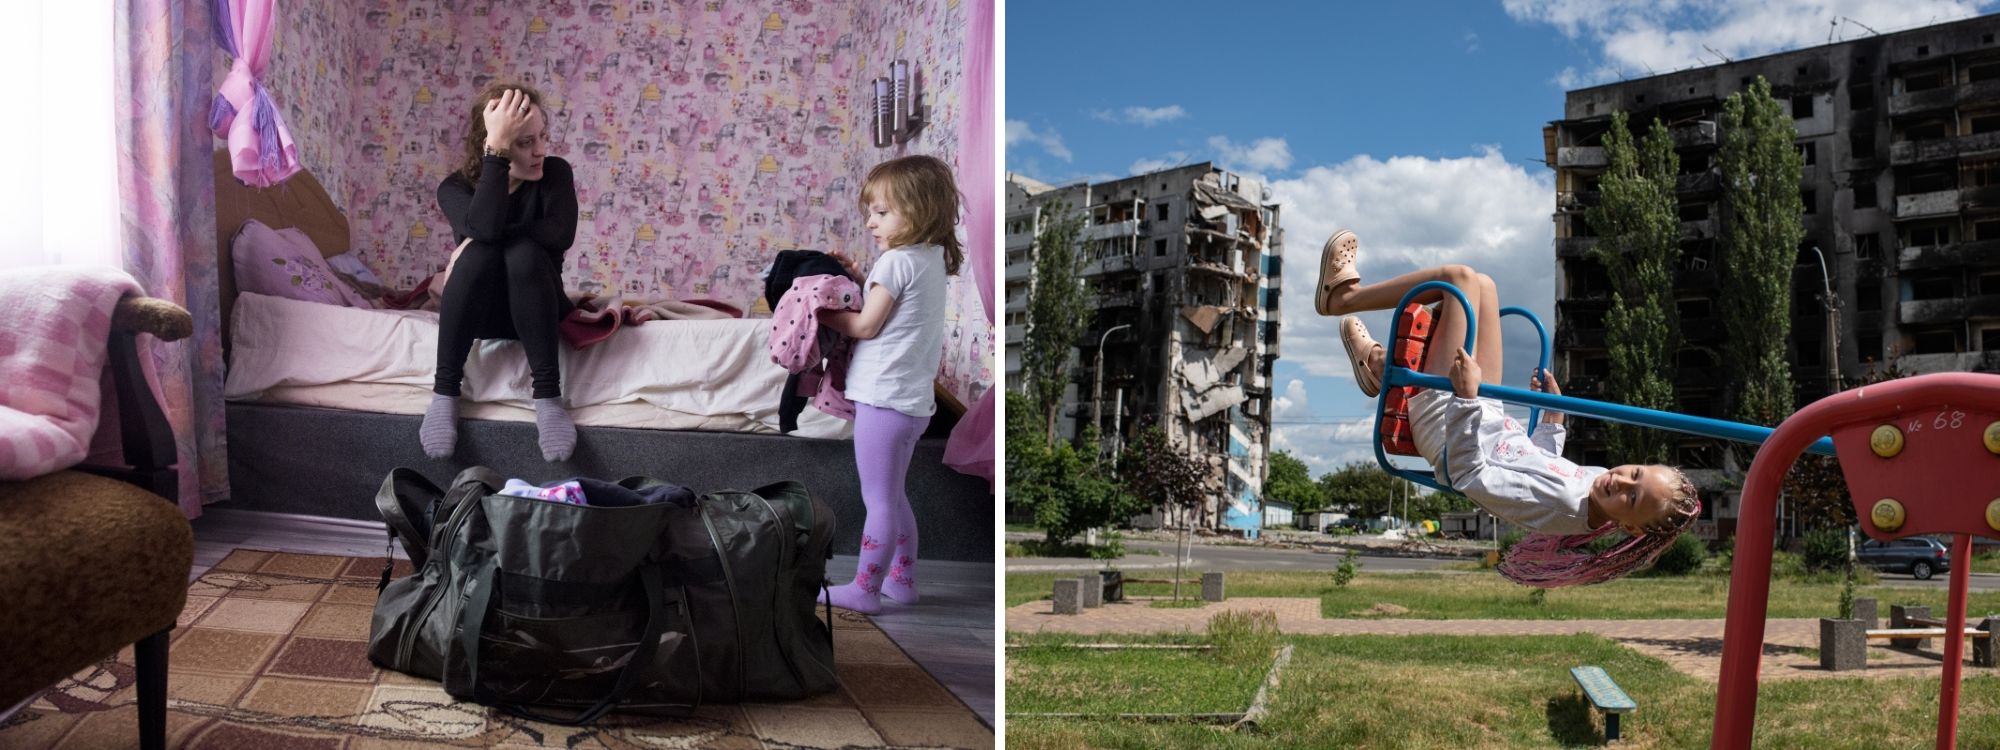 Left: A soldier and their daughter packing a bag in the child’s bedroom. Right: a child on a swing in a park with destroyed buildings in the background.